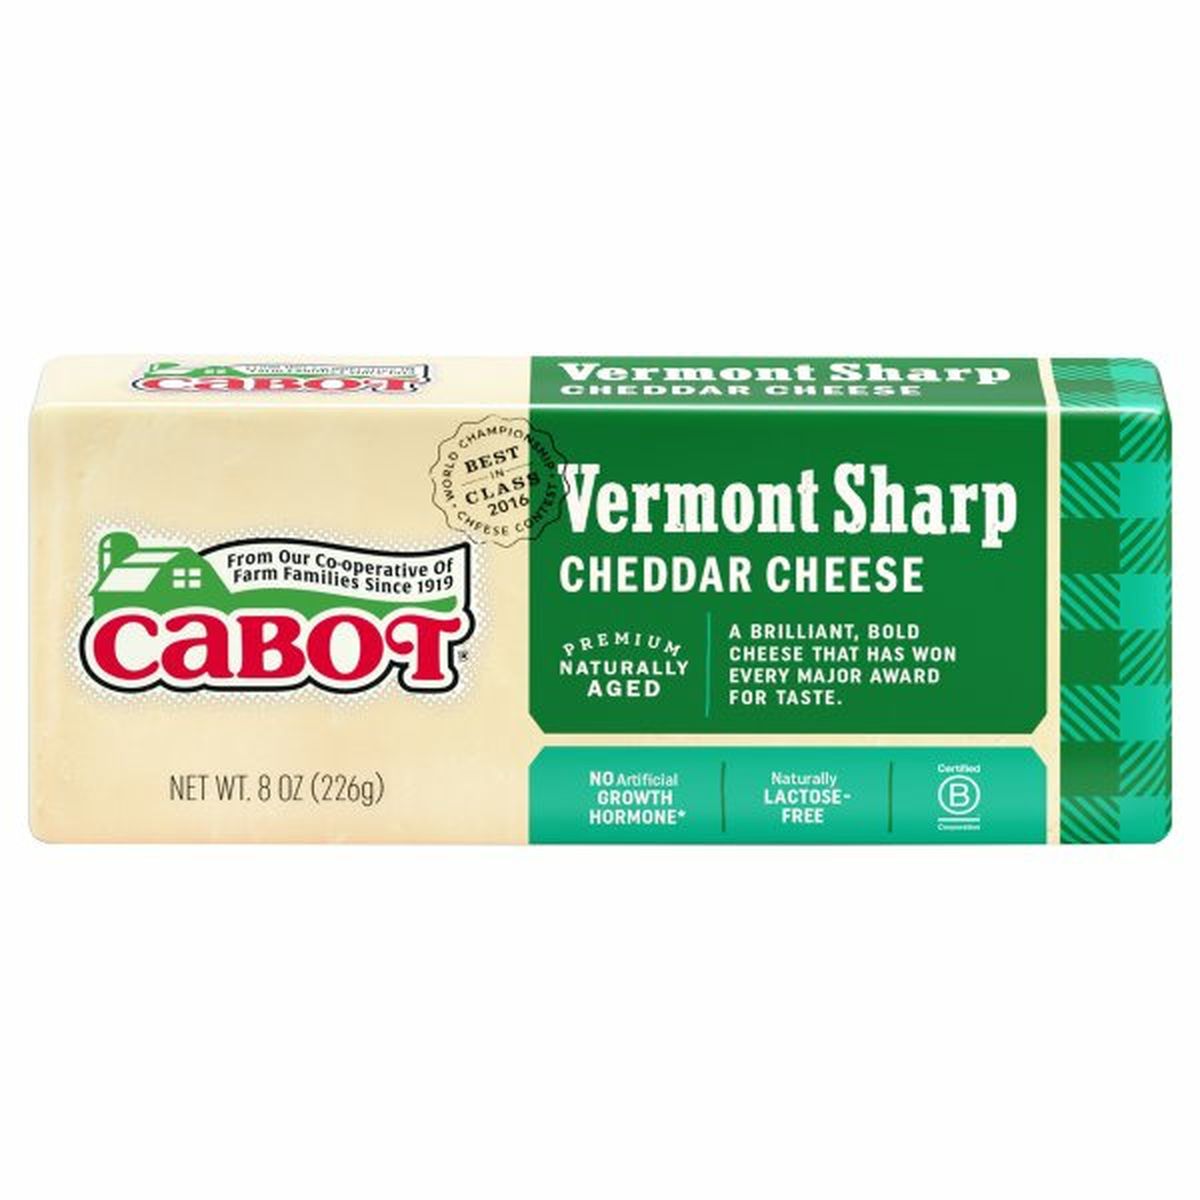 Calories in Cabot Cheese, Cheddar, Vermont Sharp